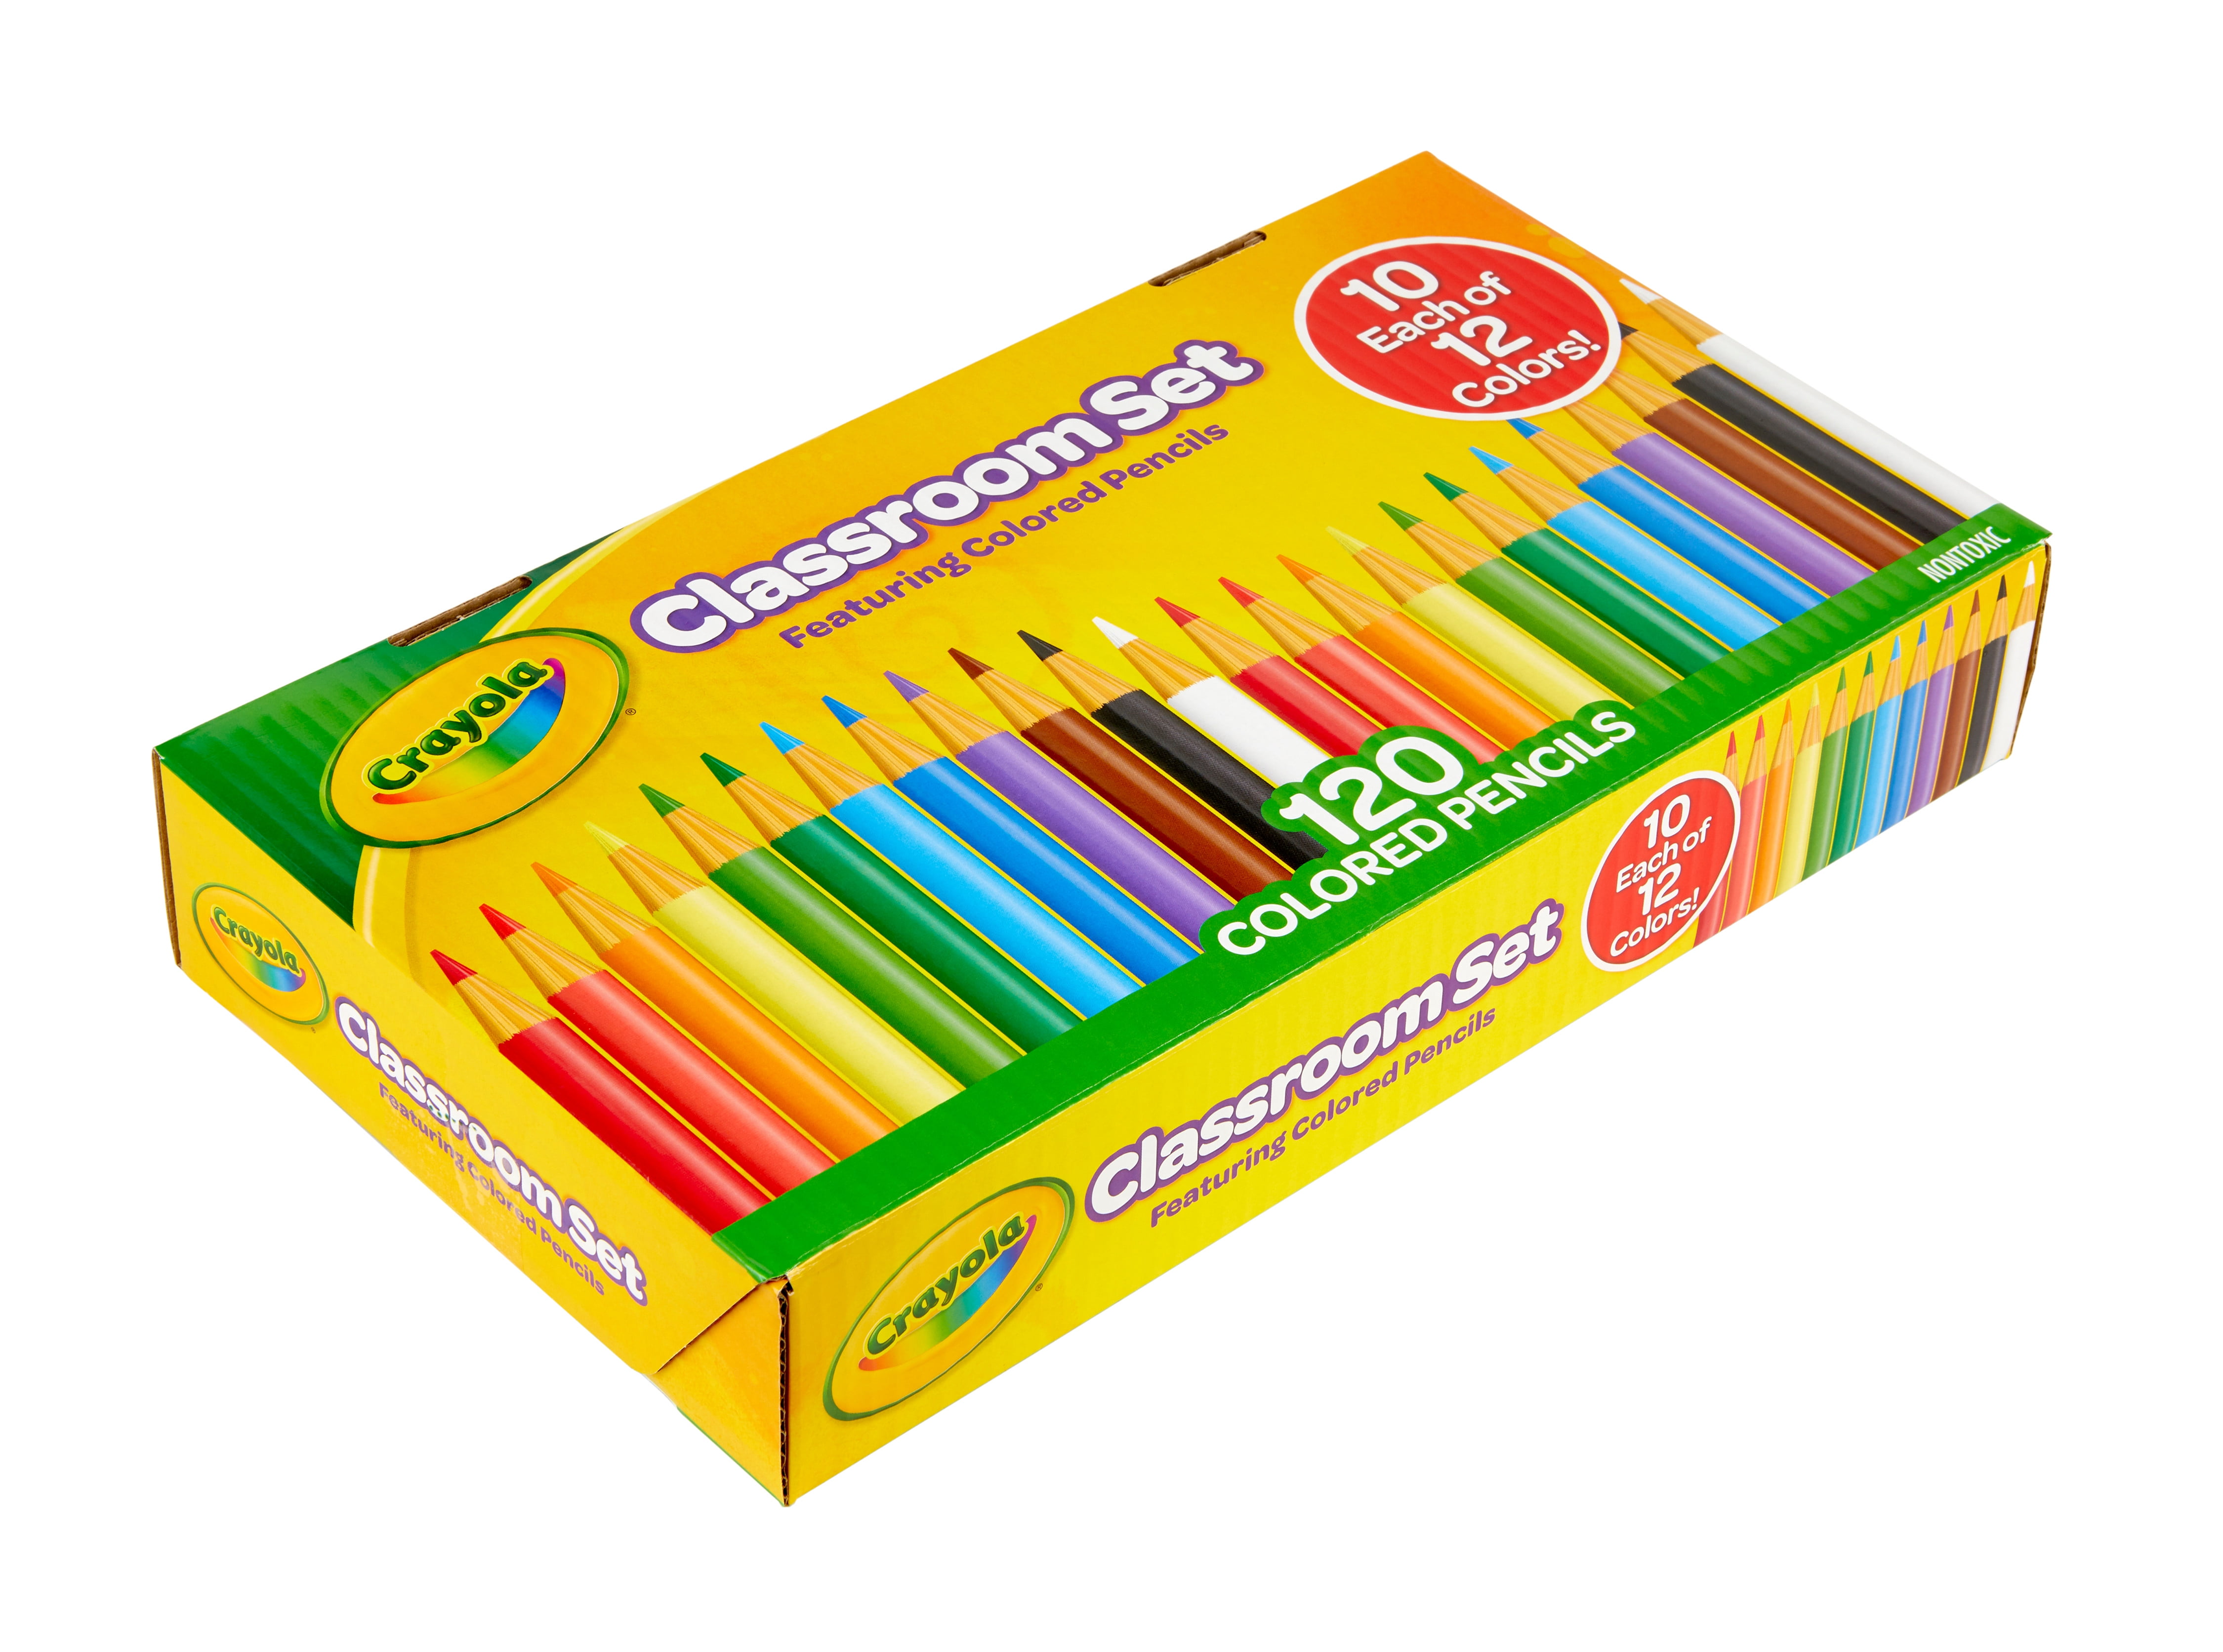 Crayola Colored Pencils Set (120ct), Coloring Book Pencils, Kids Art  Supplies, Bulk Colored Pencils, Presharpened, Ages 3+